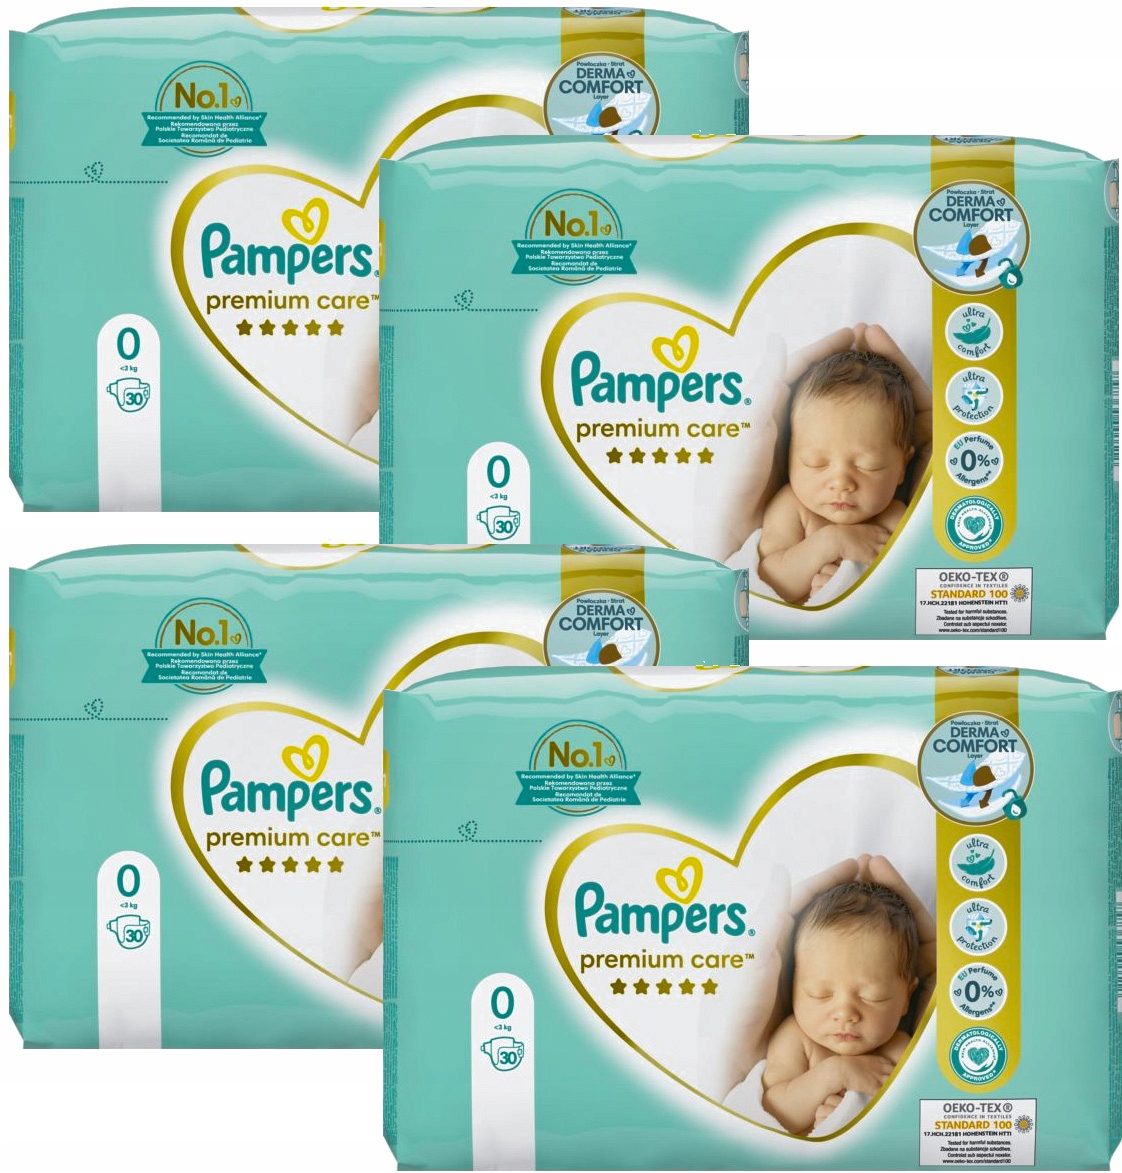 11 ciązy pampers